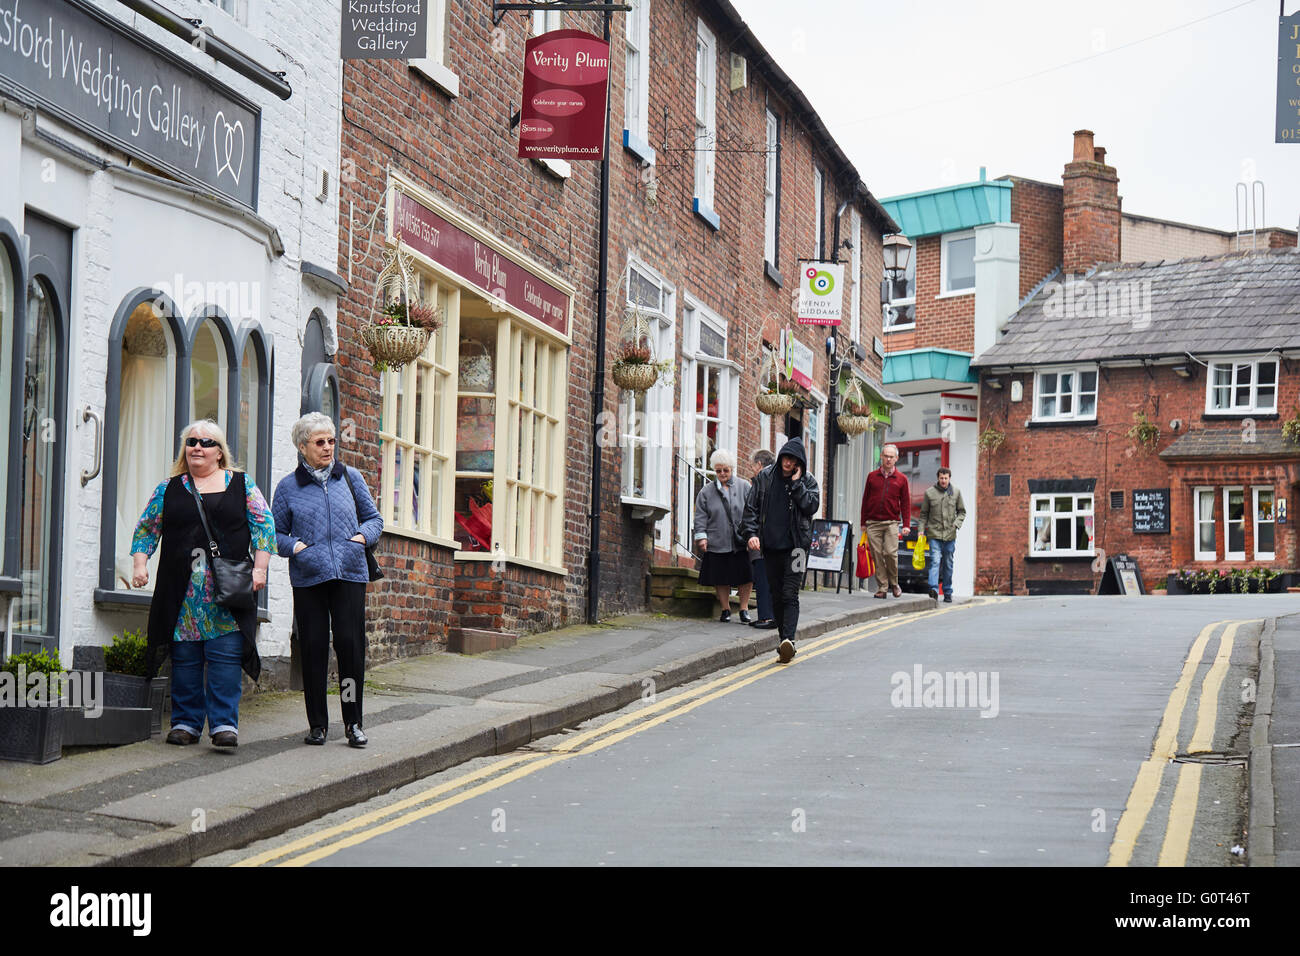 Knutsford historic town cheshire    off king street close up eating dining foods Restaurant dining food eating eating drinking Stock Photo